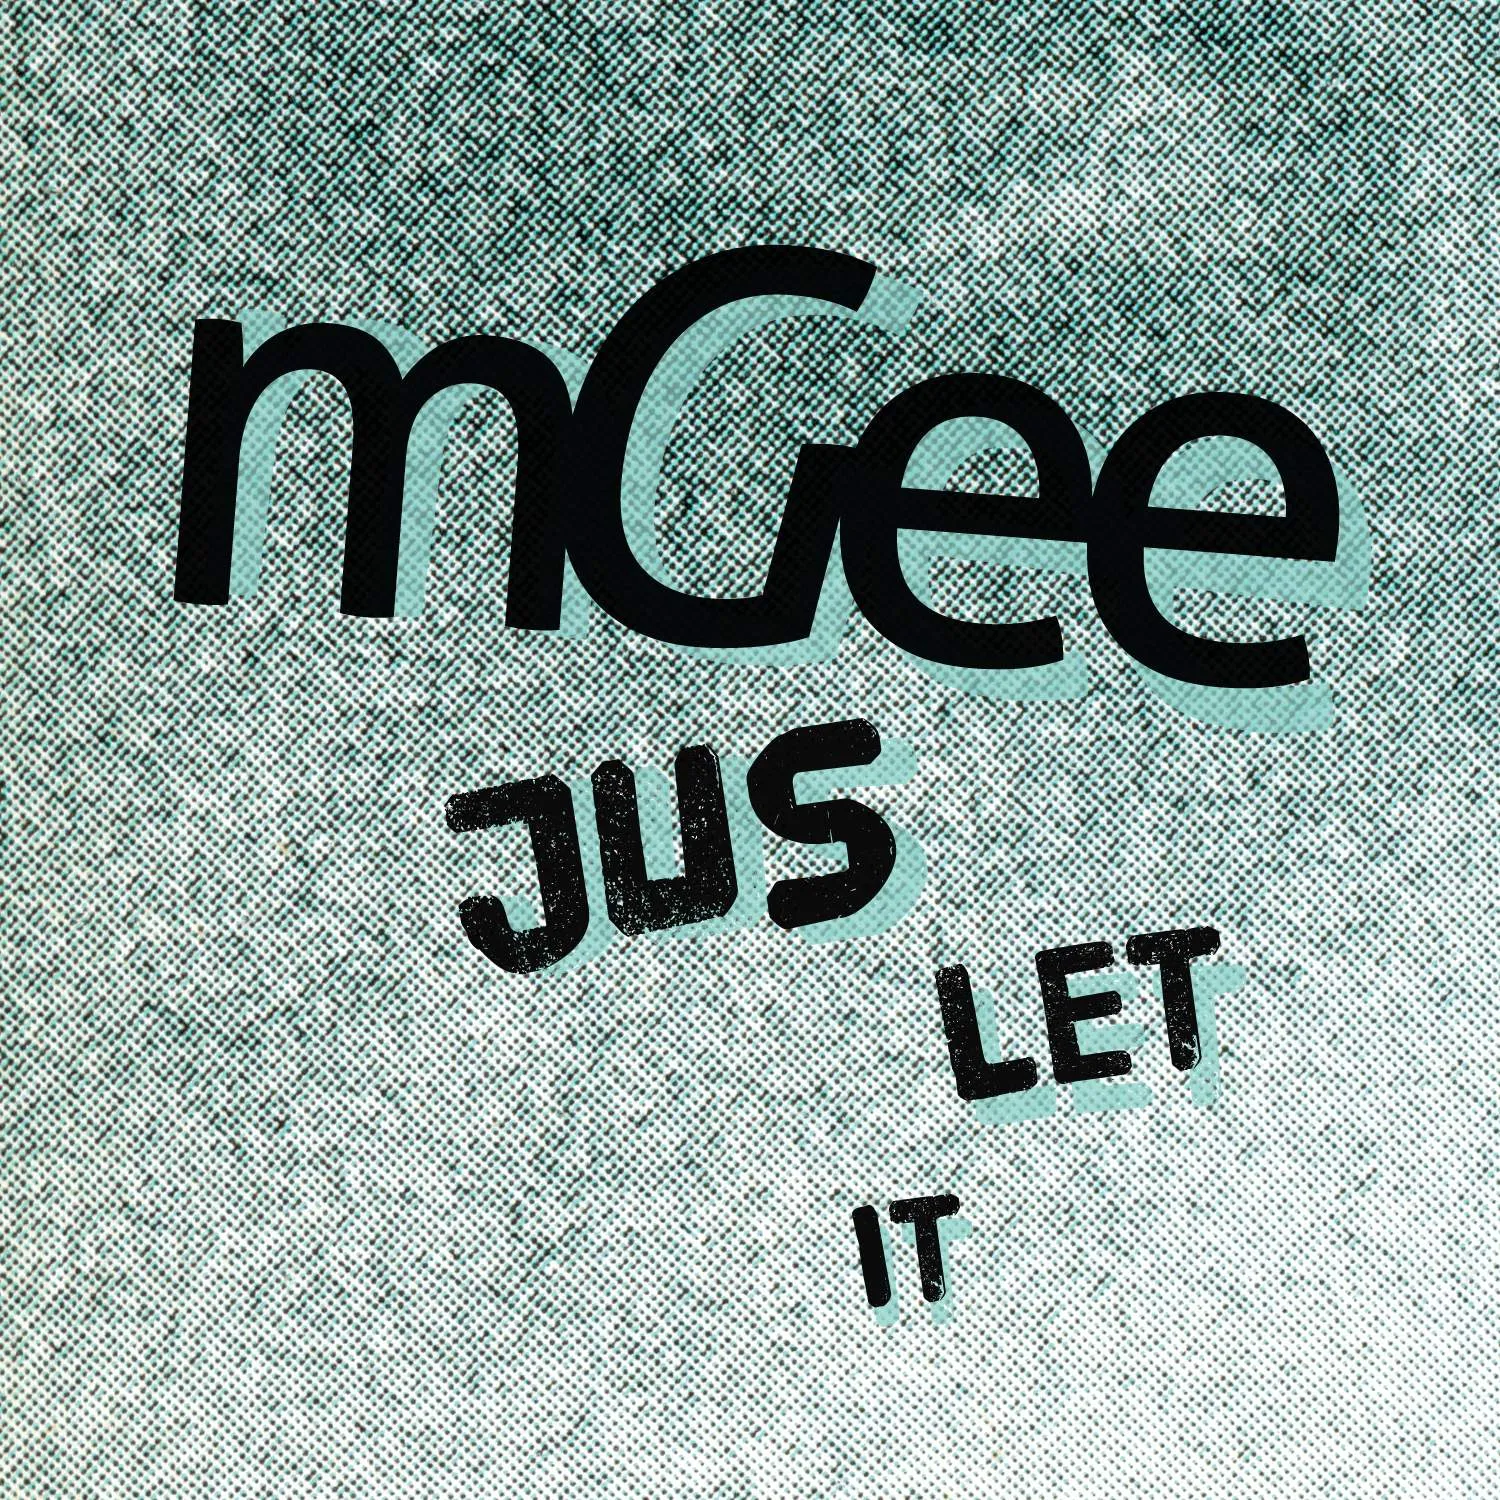 Cover art for Jus Let It